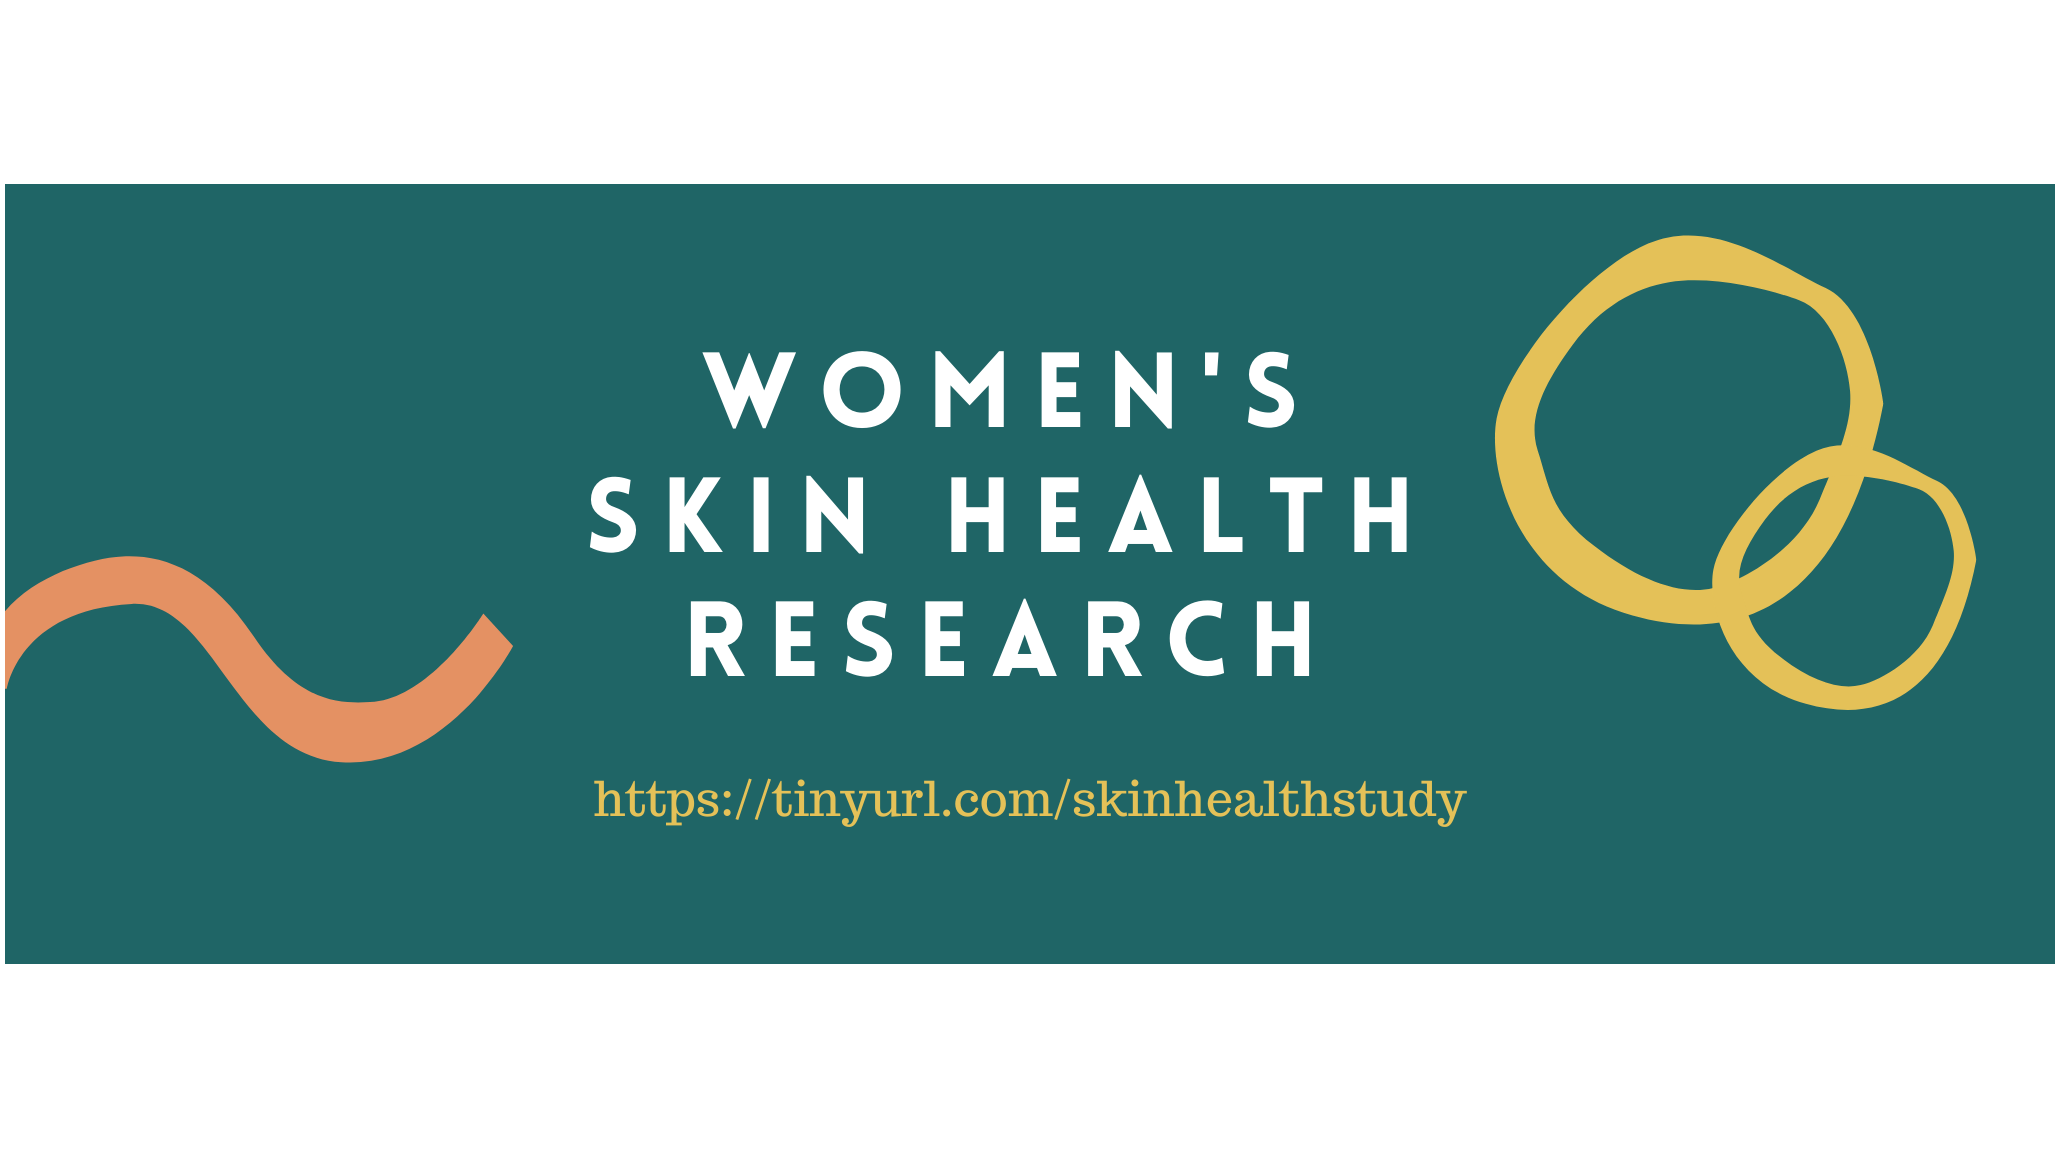 Women's Skin Health Study: Genital Self-Image, Sexual Function, Quality of Life, and Healthcare Experiences of Women With Vulvar and Non-Vulvar Inflammatory Dermatoses